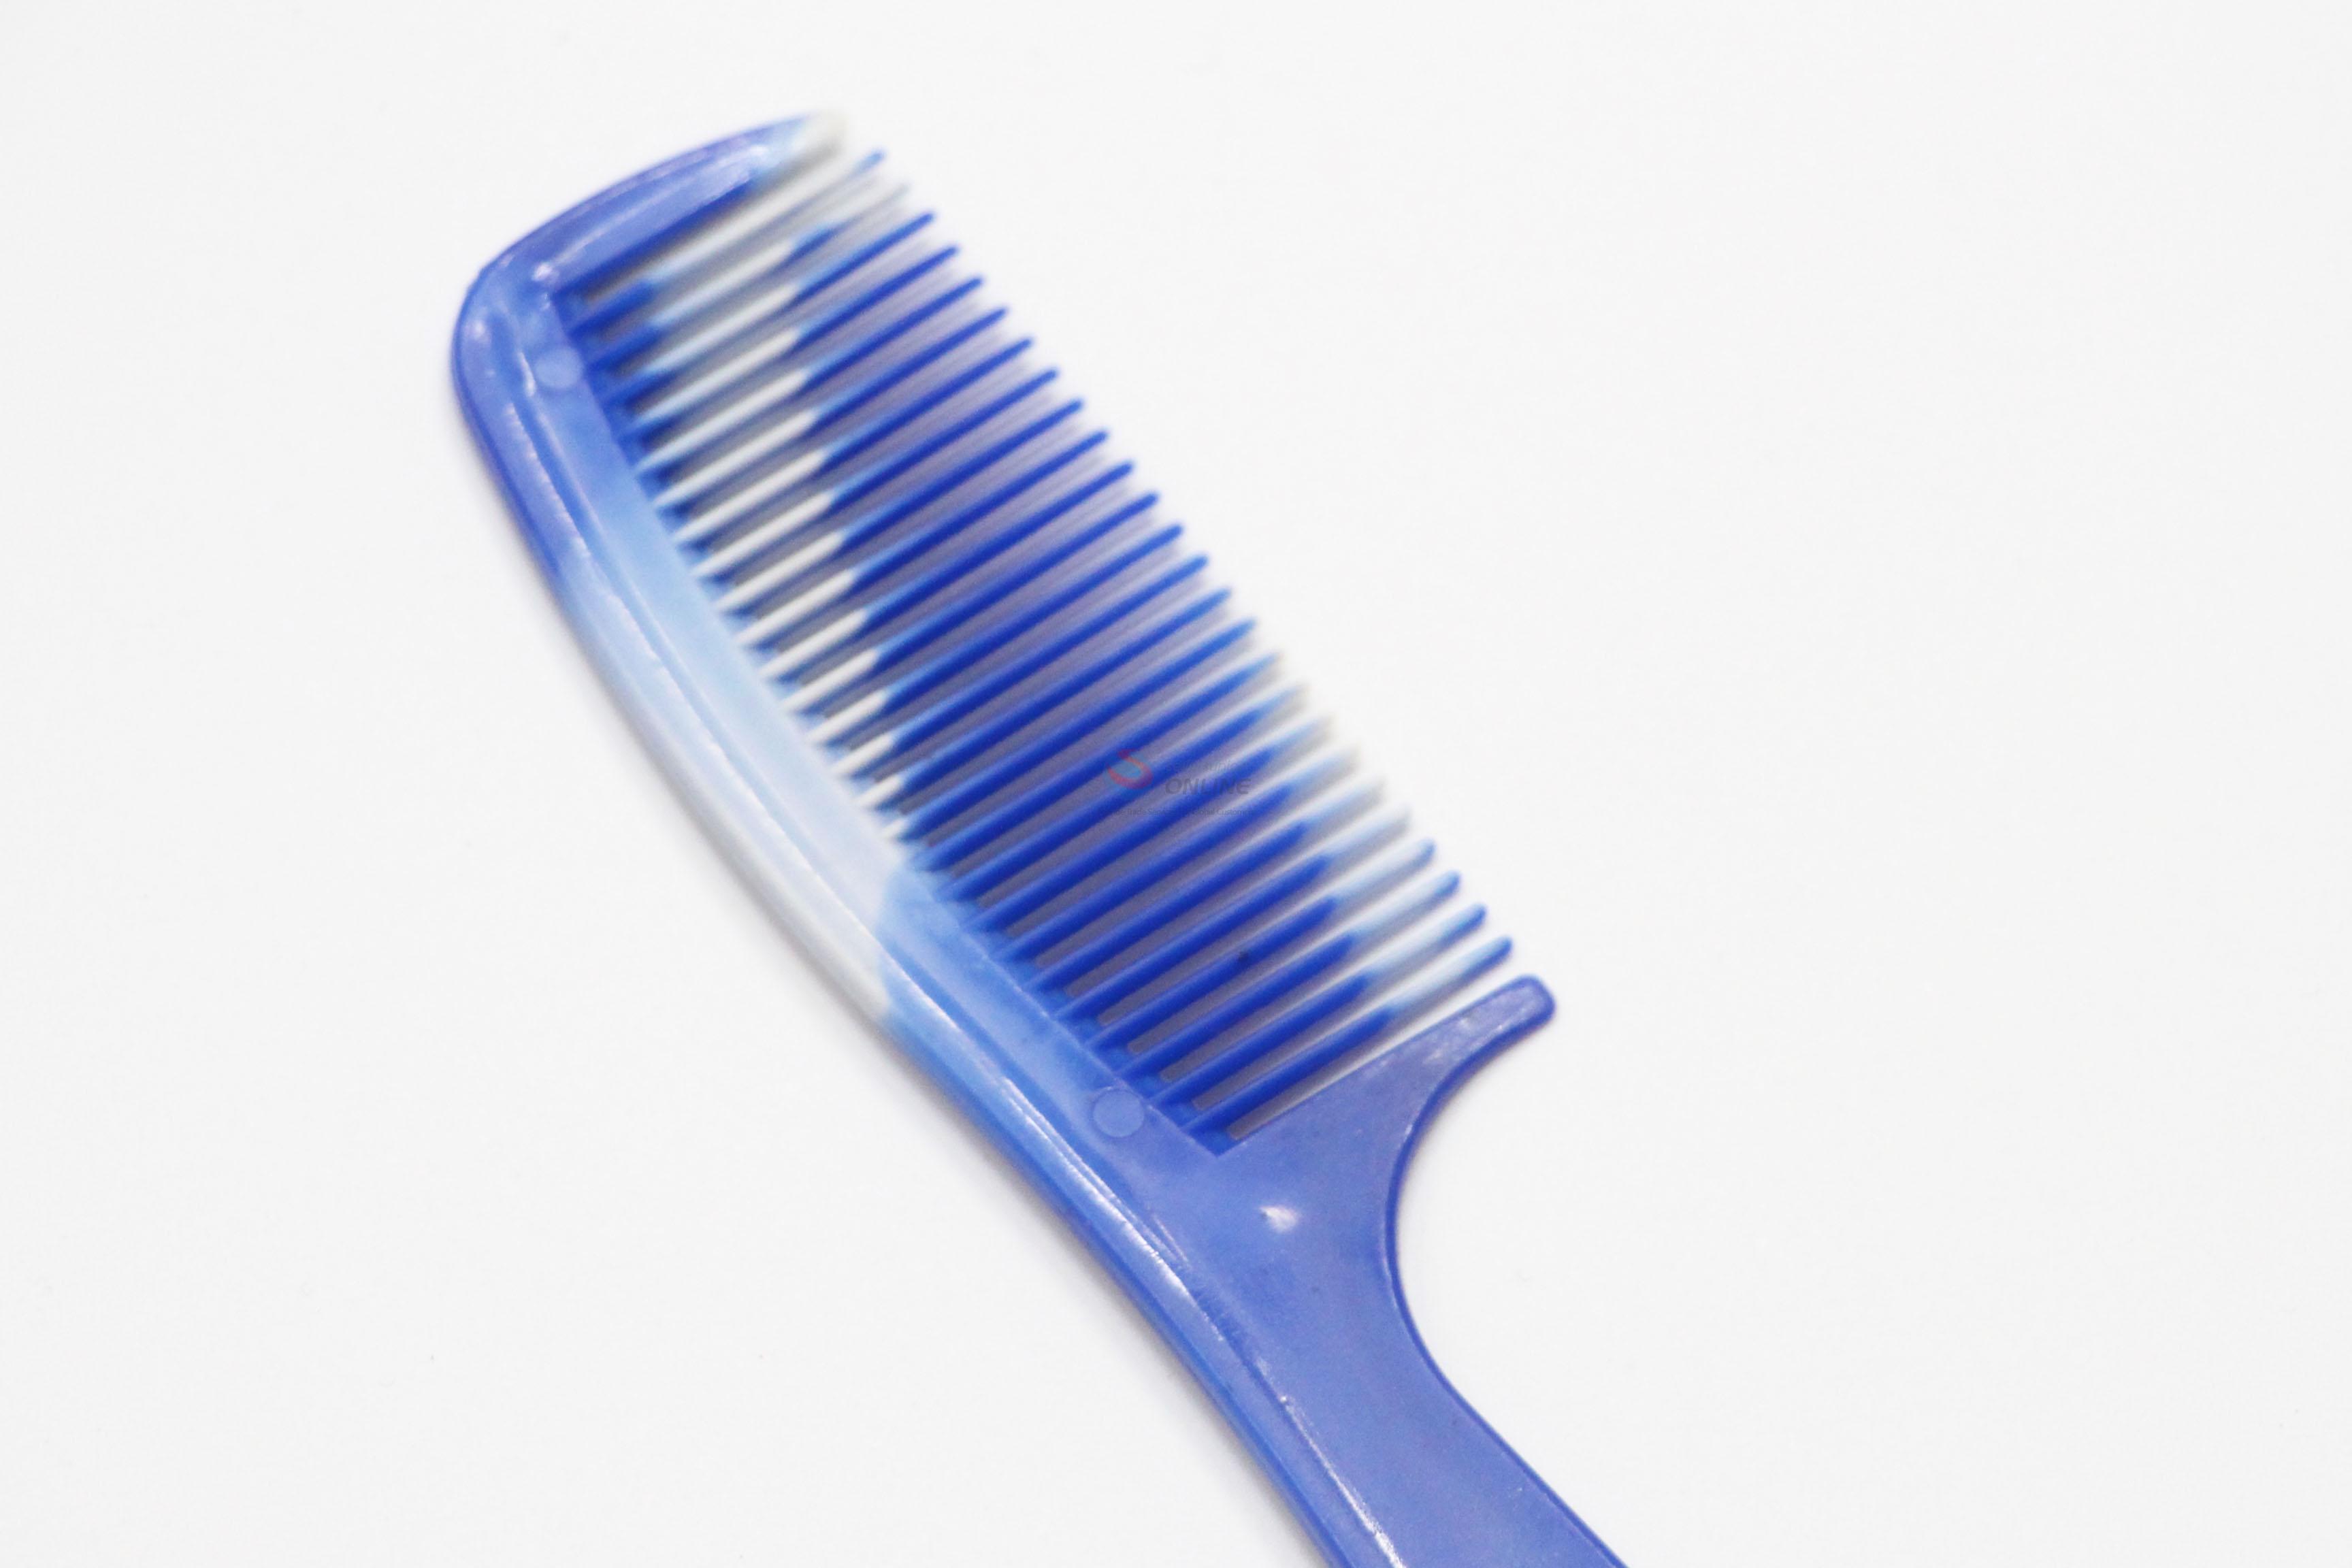 Utility and Durable Colorful Plastic Comb